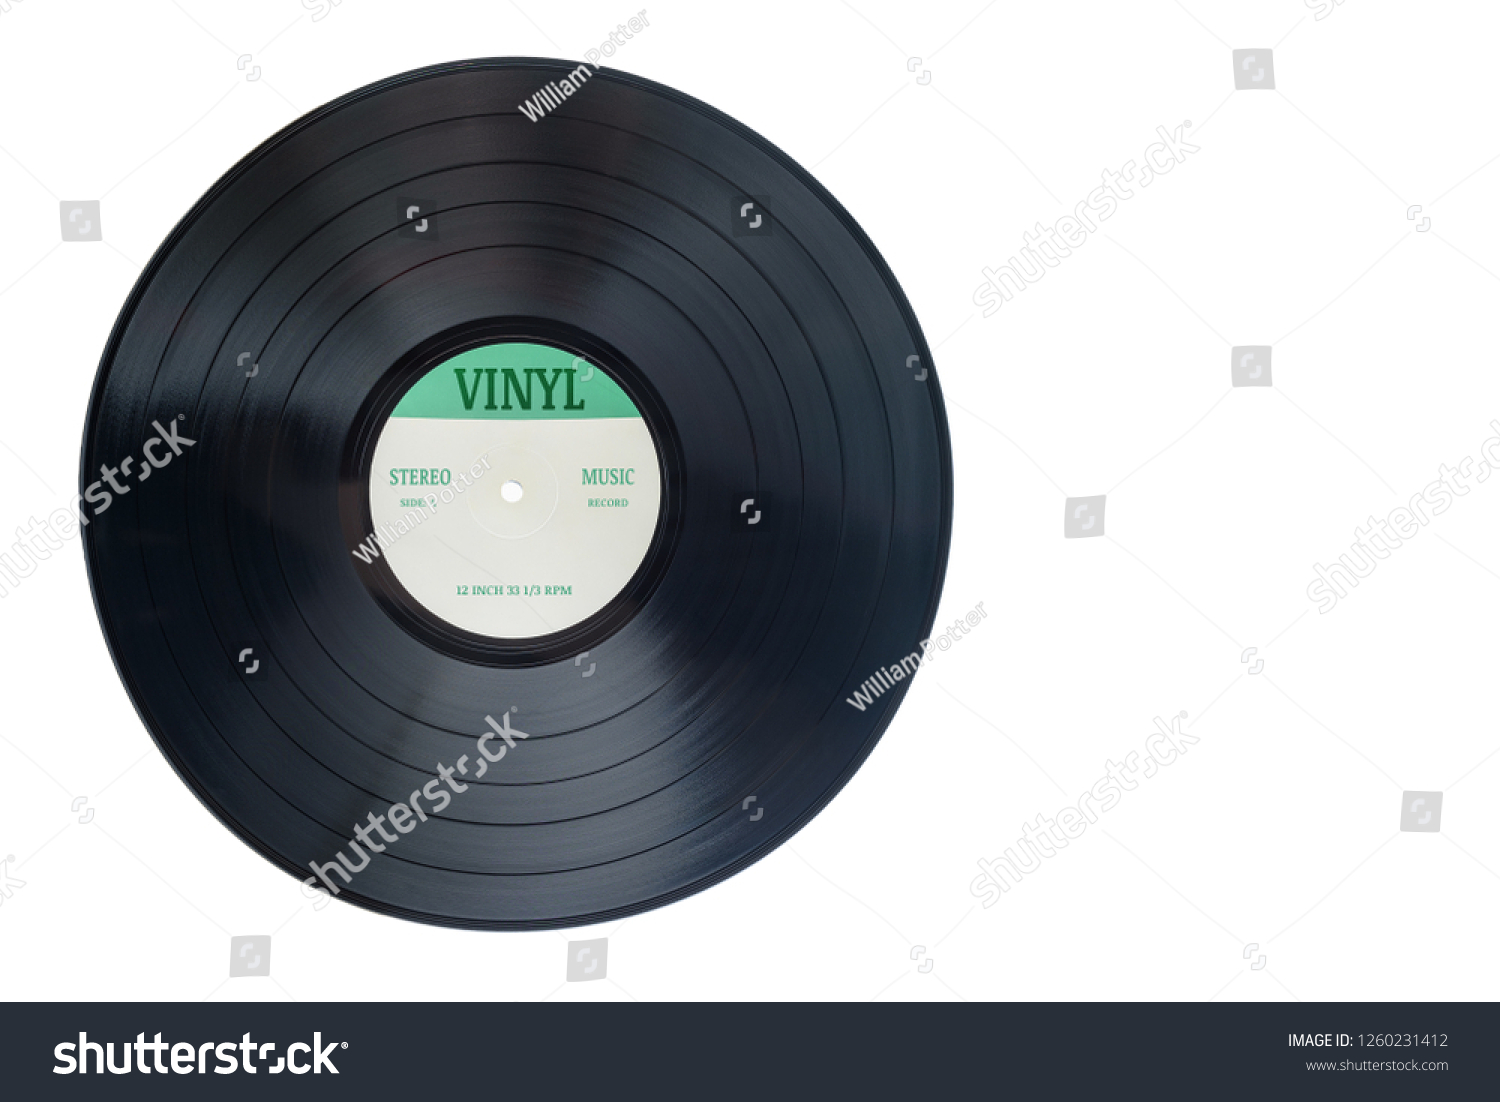 Closeup view of gramophone vinyl LP record or phonograph record with green label. Black musical long play album disc 12 inch 33 rpm spiral groove. Stereo sound record. Isolated on white background. #1260231412